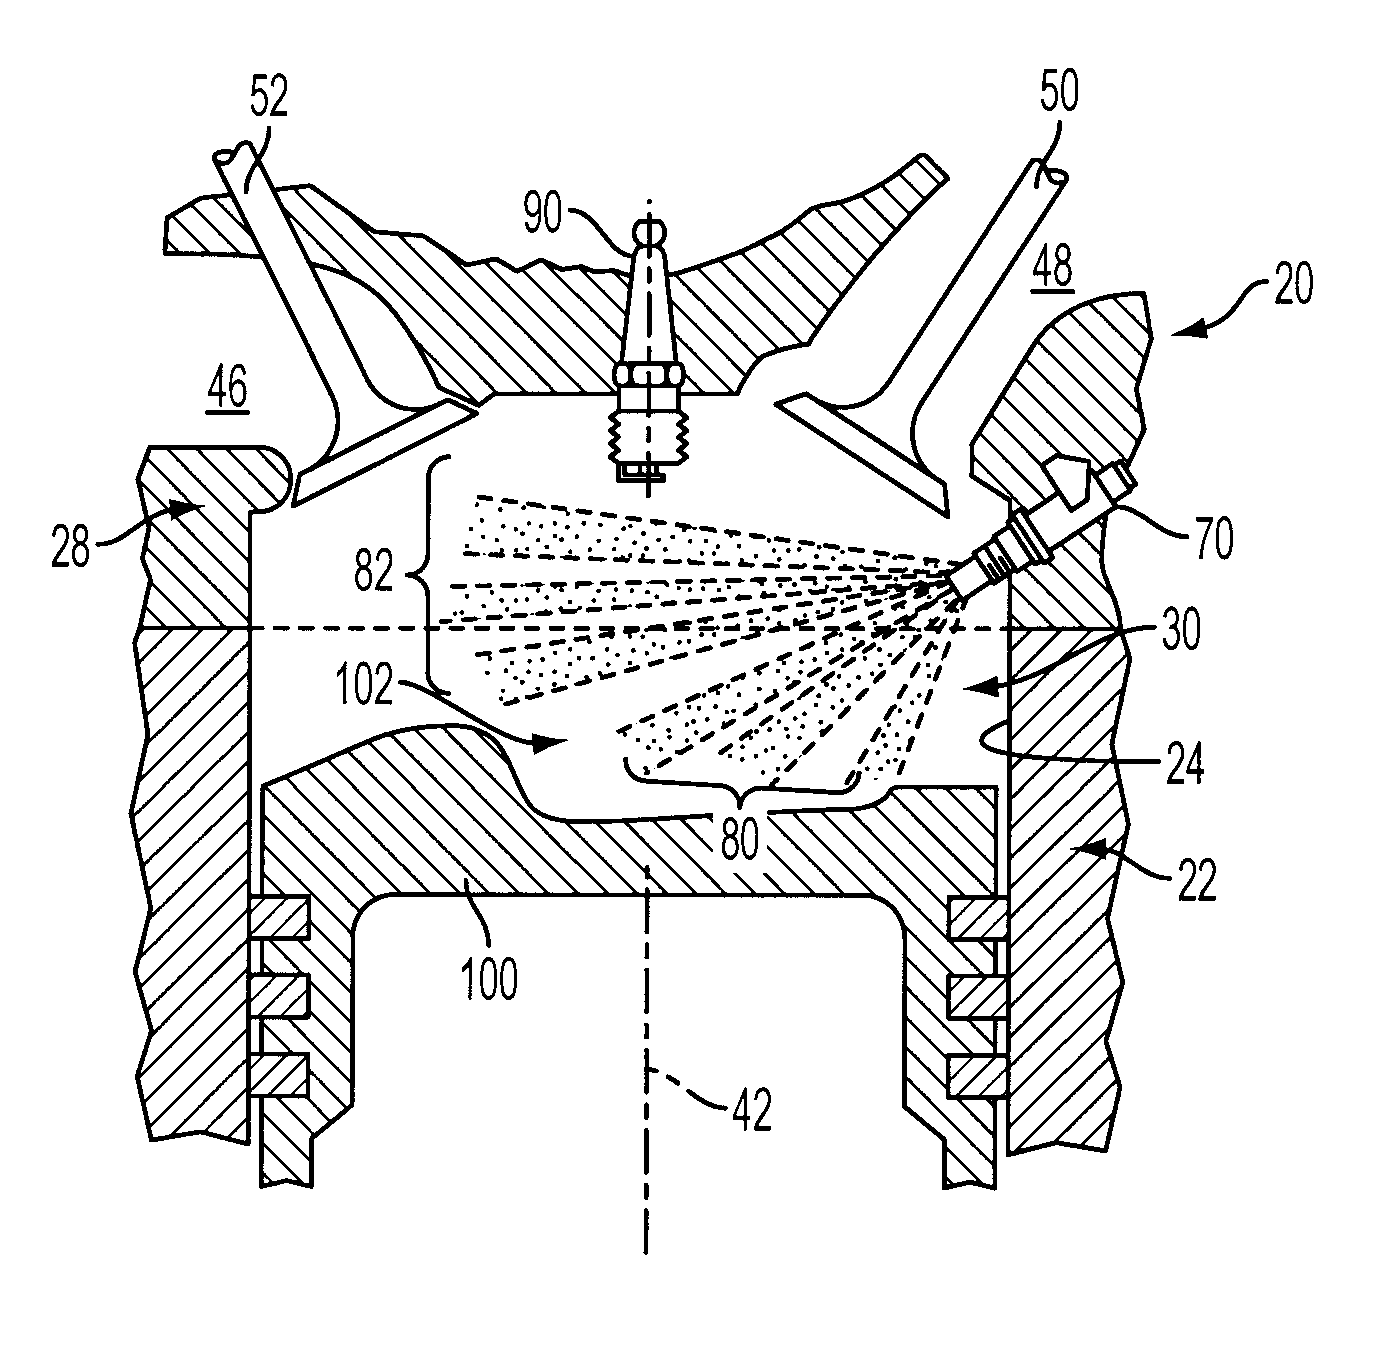 Fuel injector spray pattern for direct injection spark ignition engines